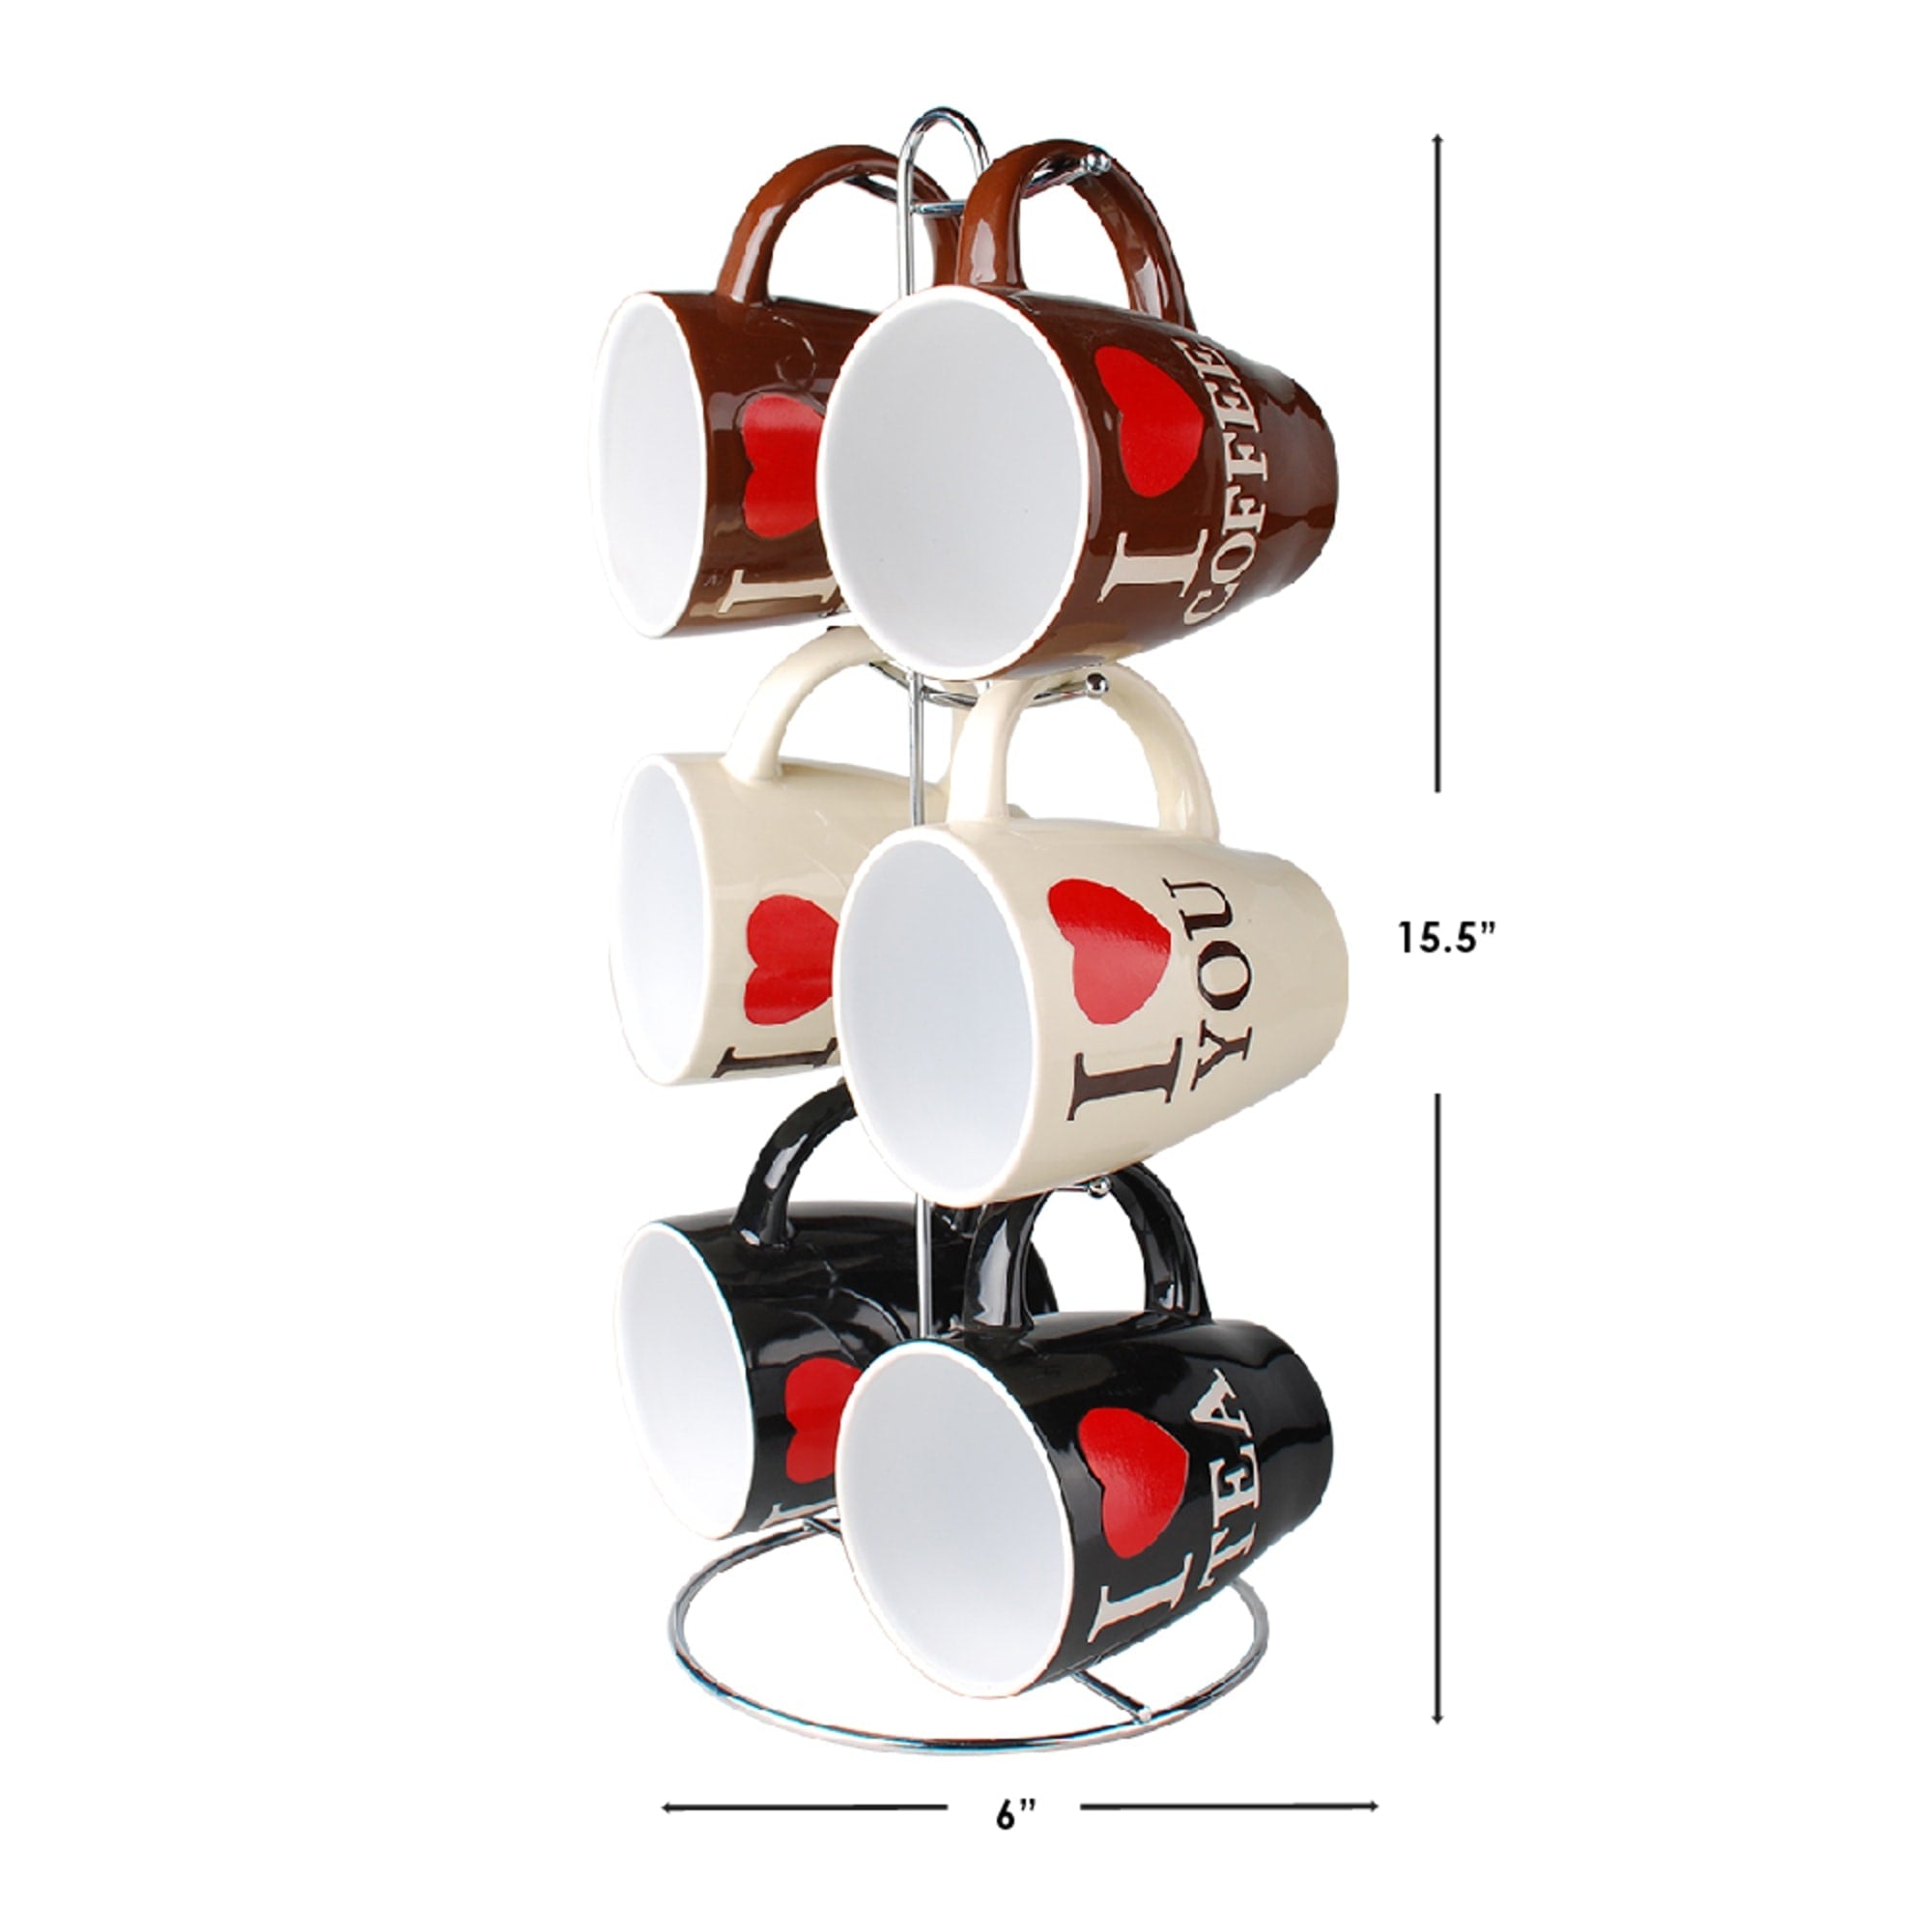 Home Basics I Love Coffee 6 Piece Mug Set with Stand $10.00 EACH, CASE PACK OF 6